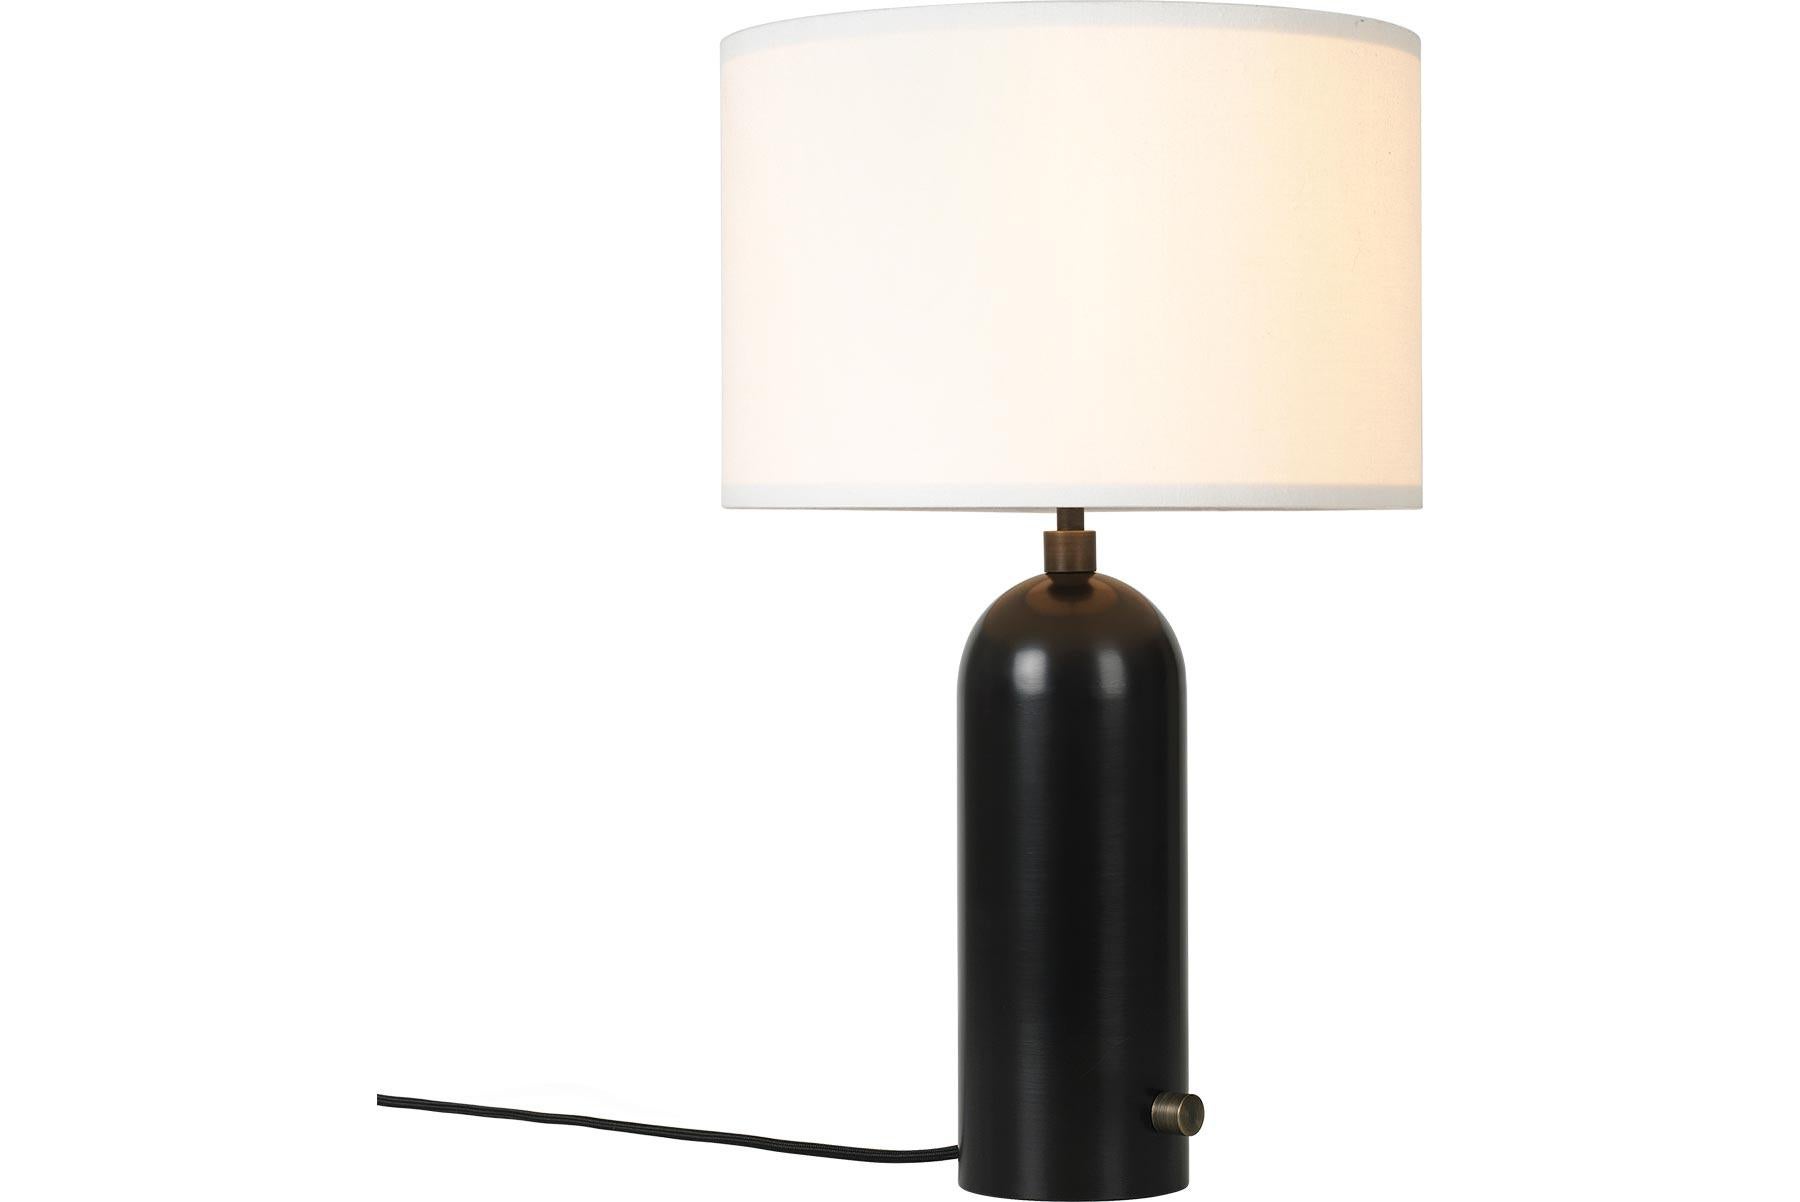 Gravity Table Lamp - Small, Black Marble, White In New Condition For Sale In Berkeley, CA